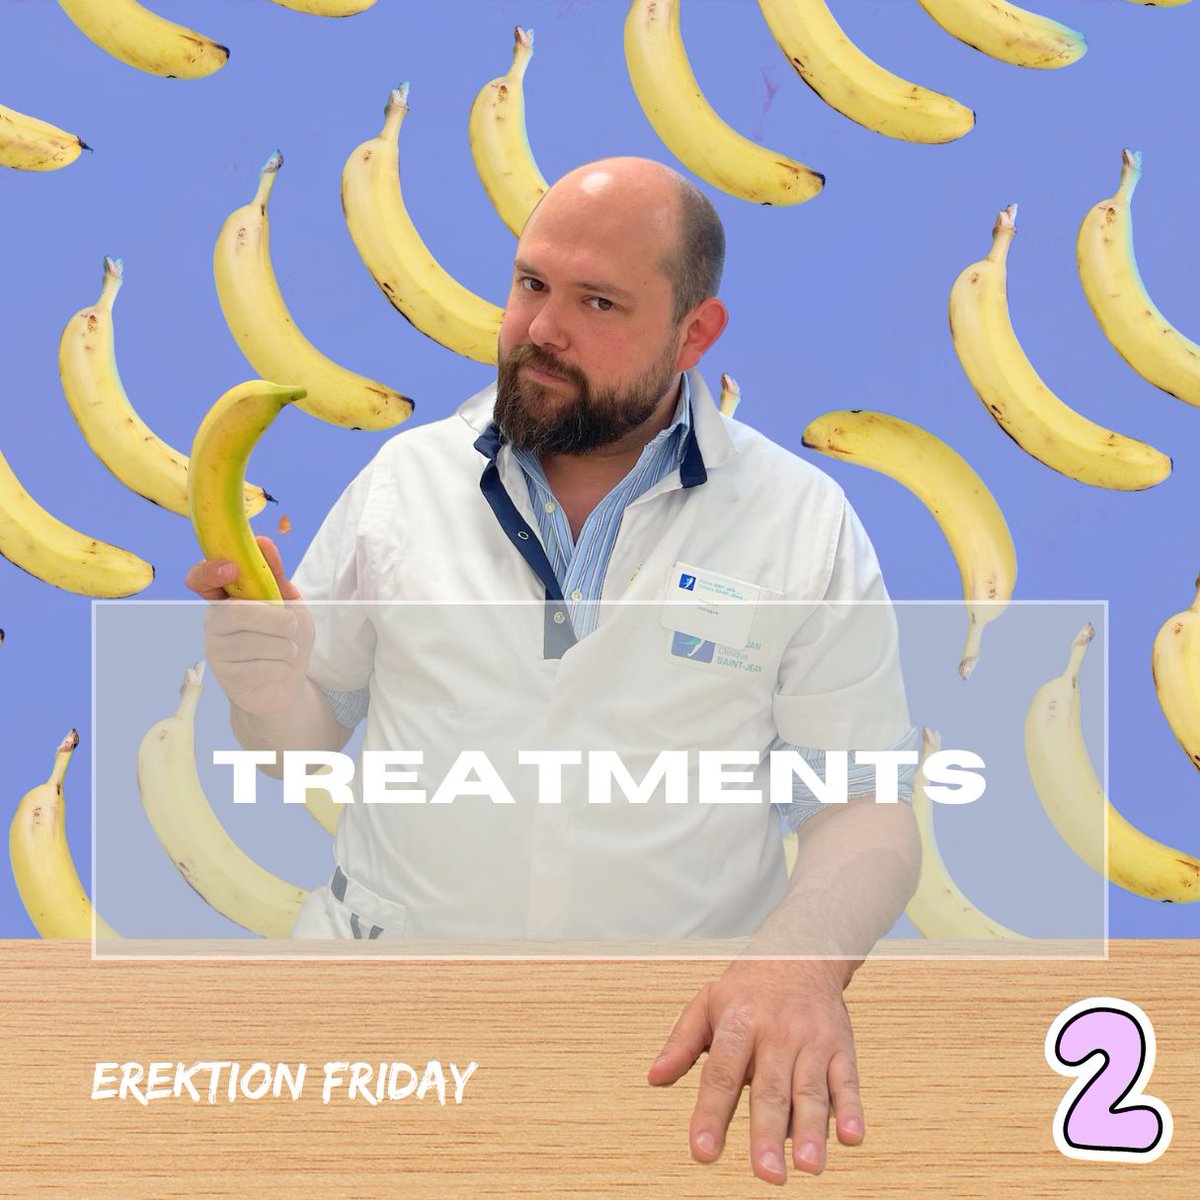 In the coming weeks, explore ways to manage er*ctile dysfunction through lifestyle changes, medications, and surgery. Treatment should match the cause of ED, your preferences, and health. Consult your #urologist for guidance. buff.ly/3SUaRgG #ErektionFriday #malehealth